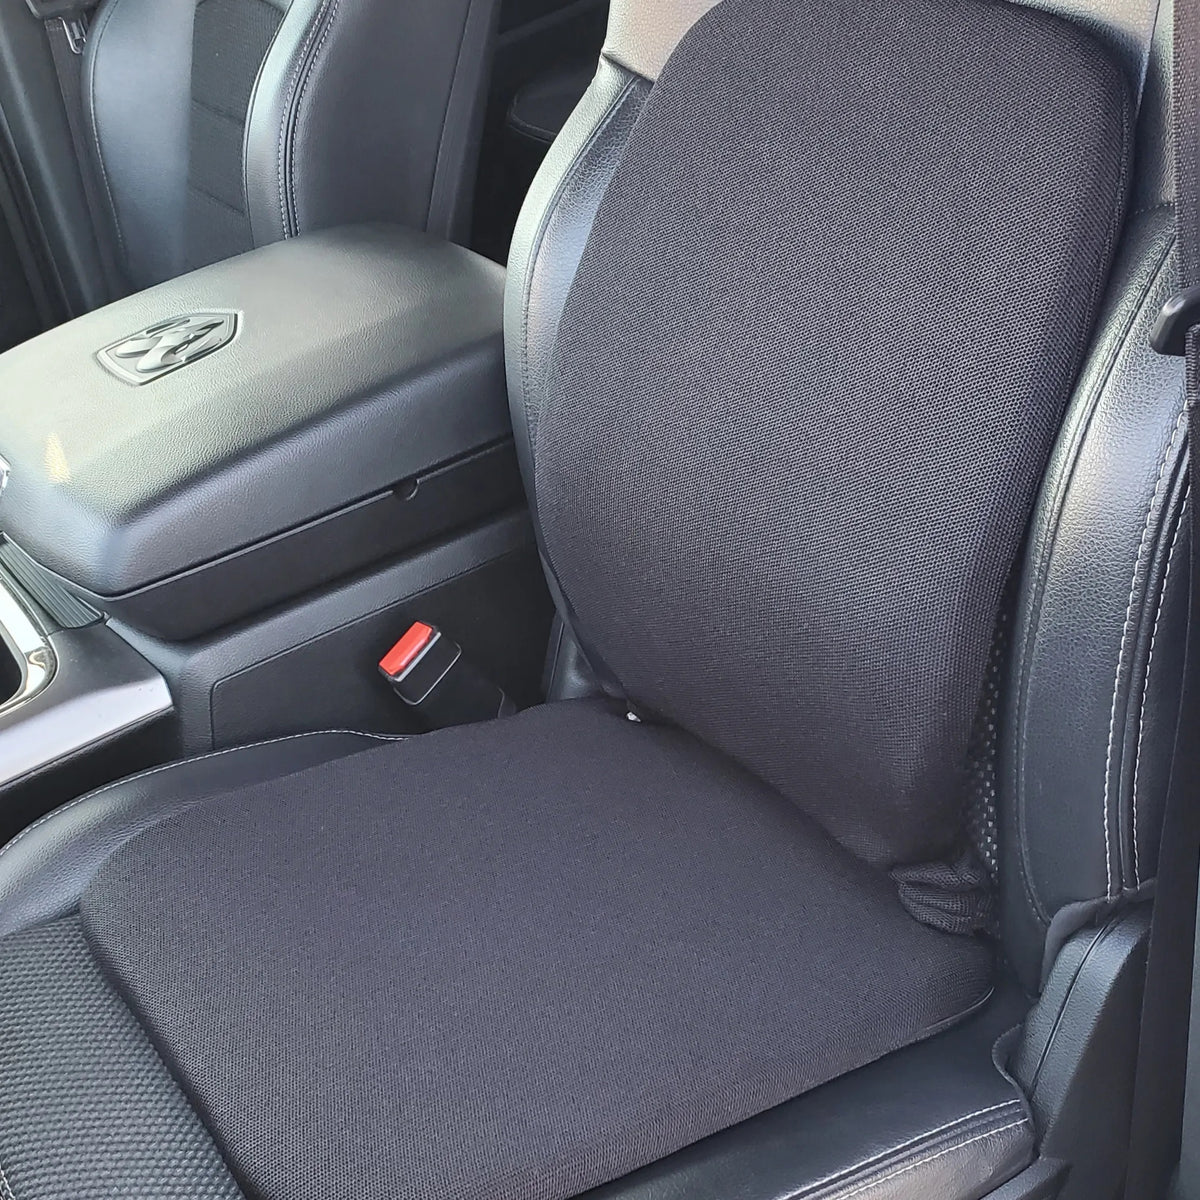 Lumbar Support for Chairs & Car Seats - BackJoy Perfect Fit Lumbar